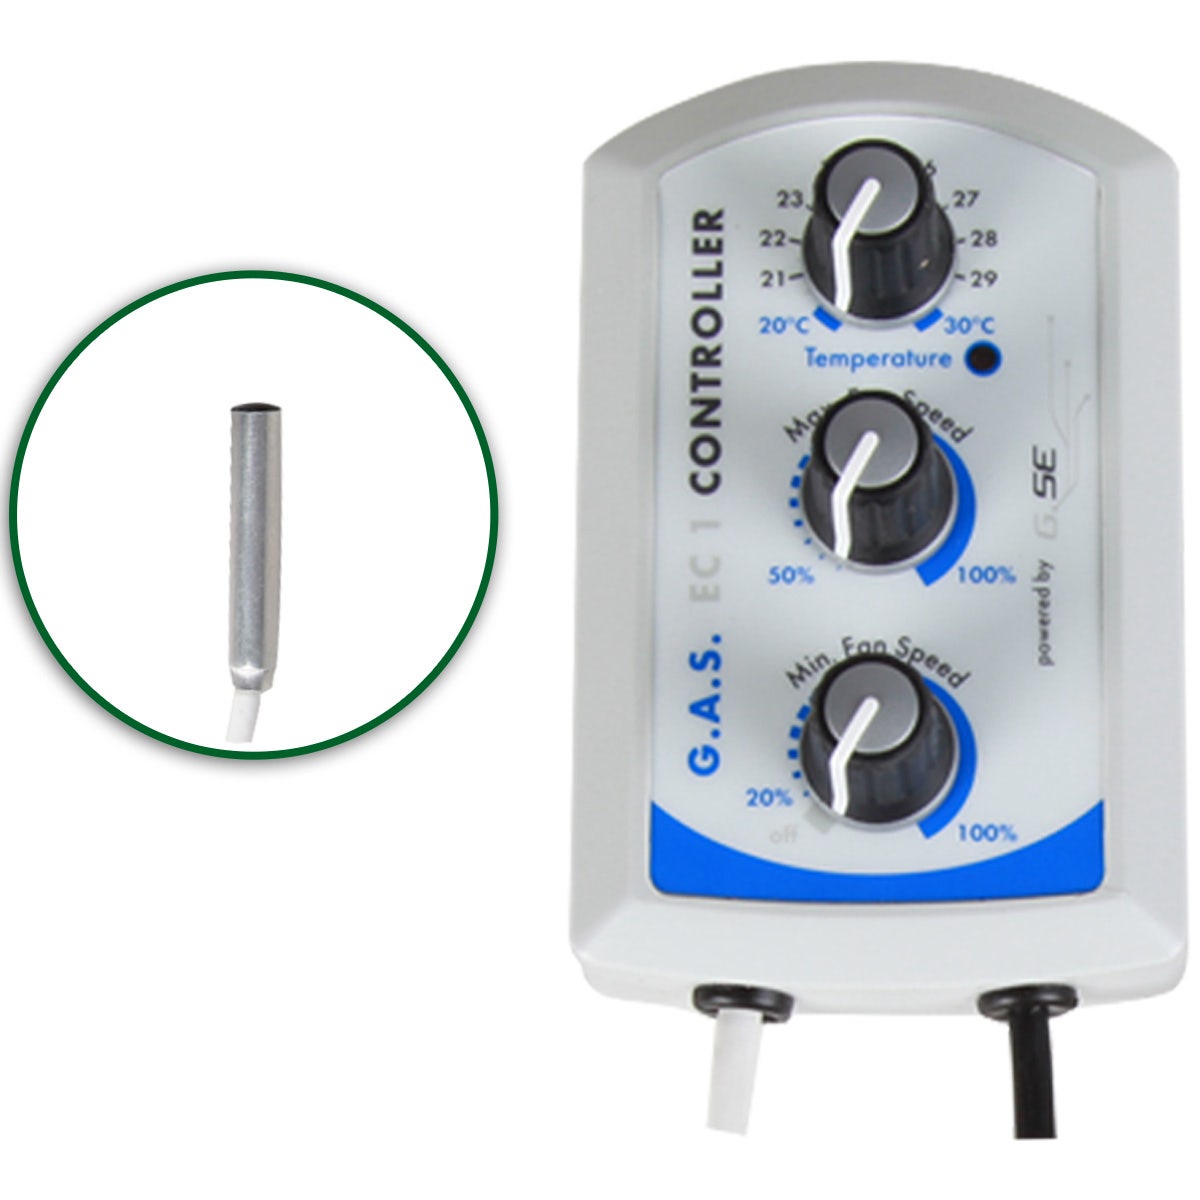 G.A.S EC1 Thermostatic Fan Speed Controller